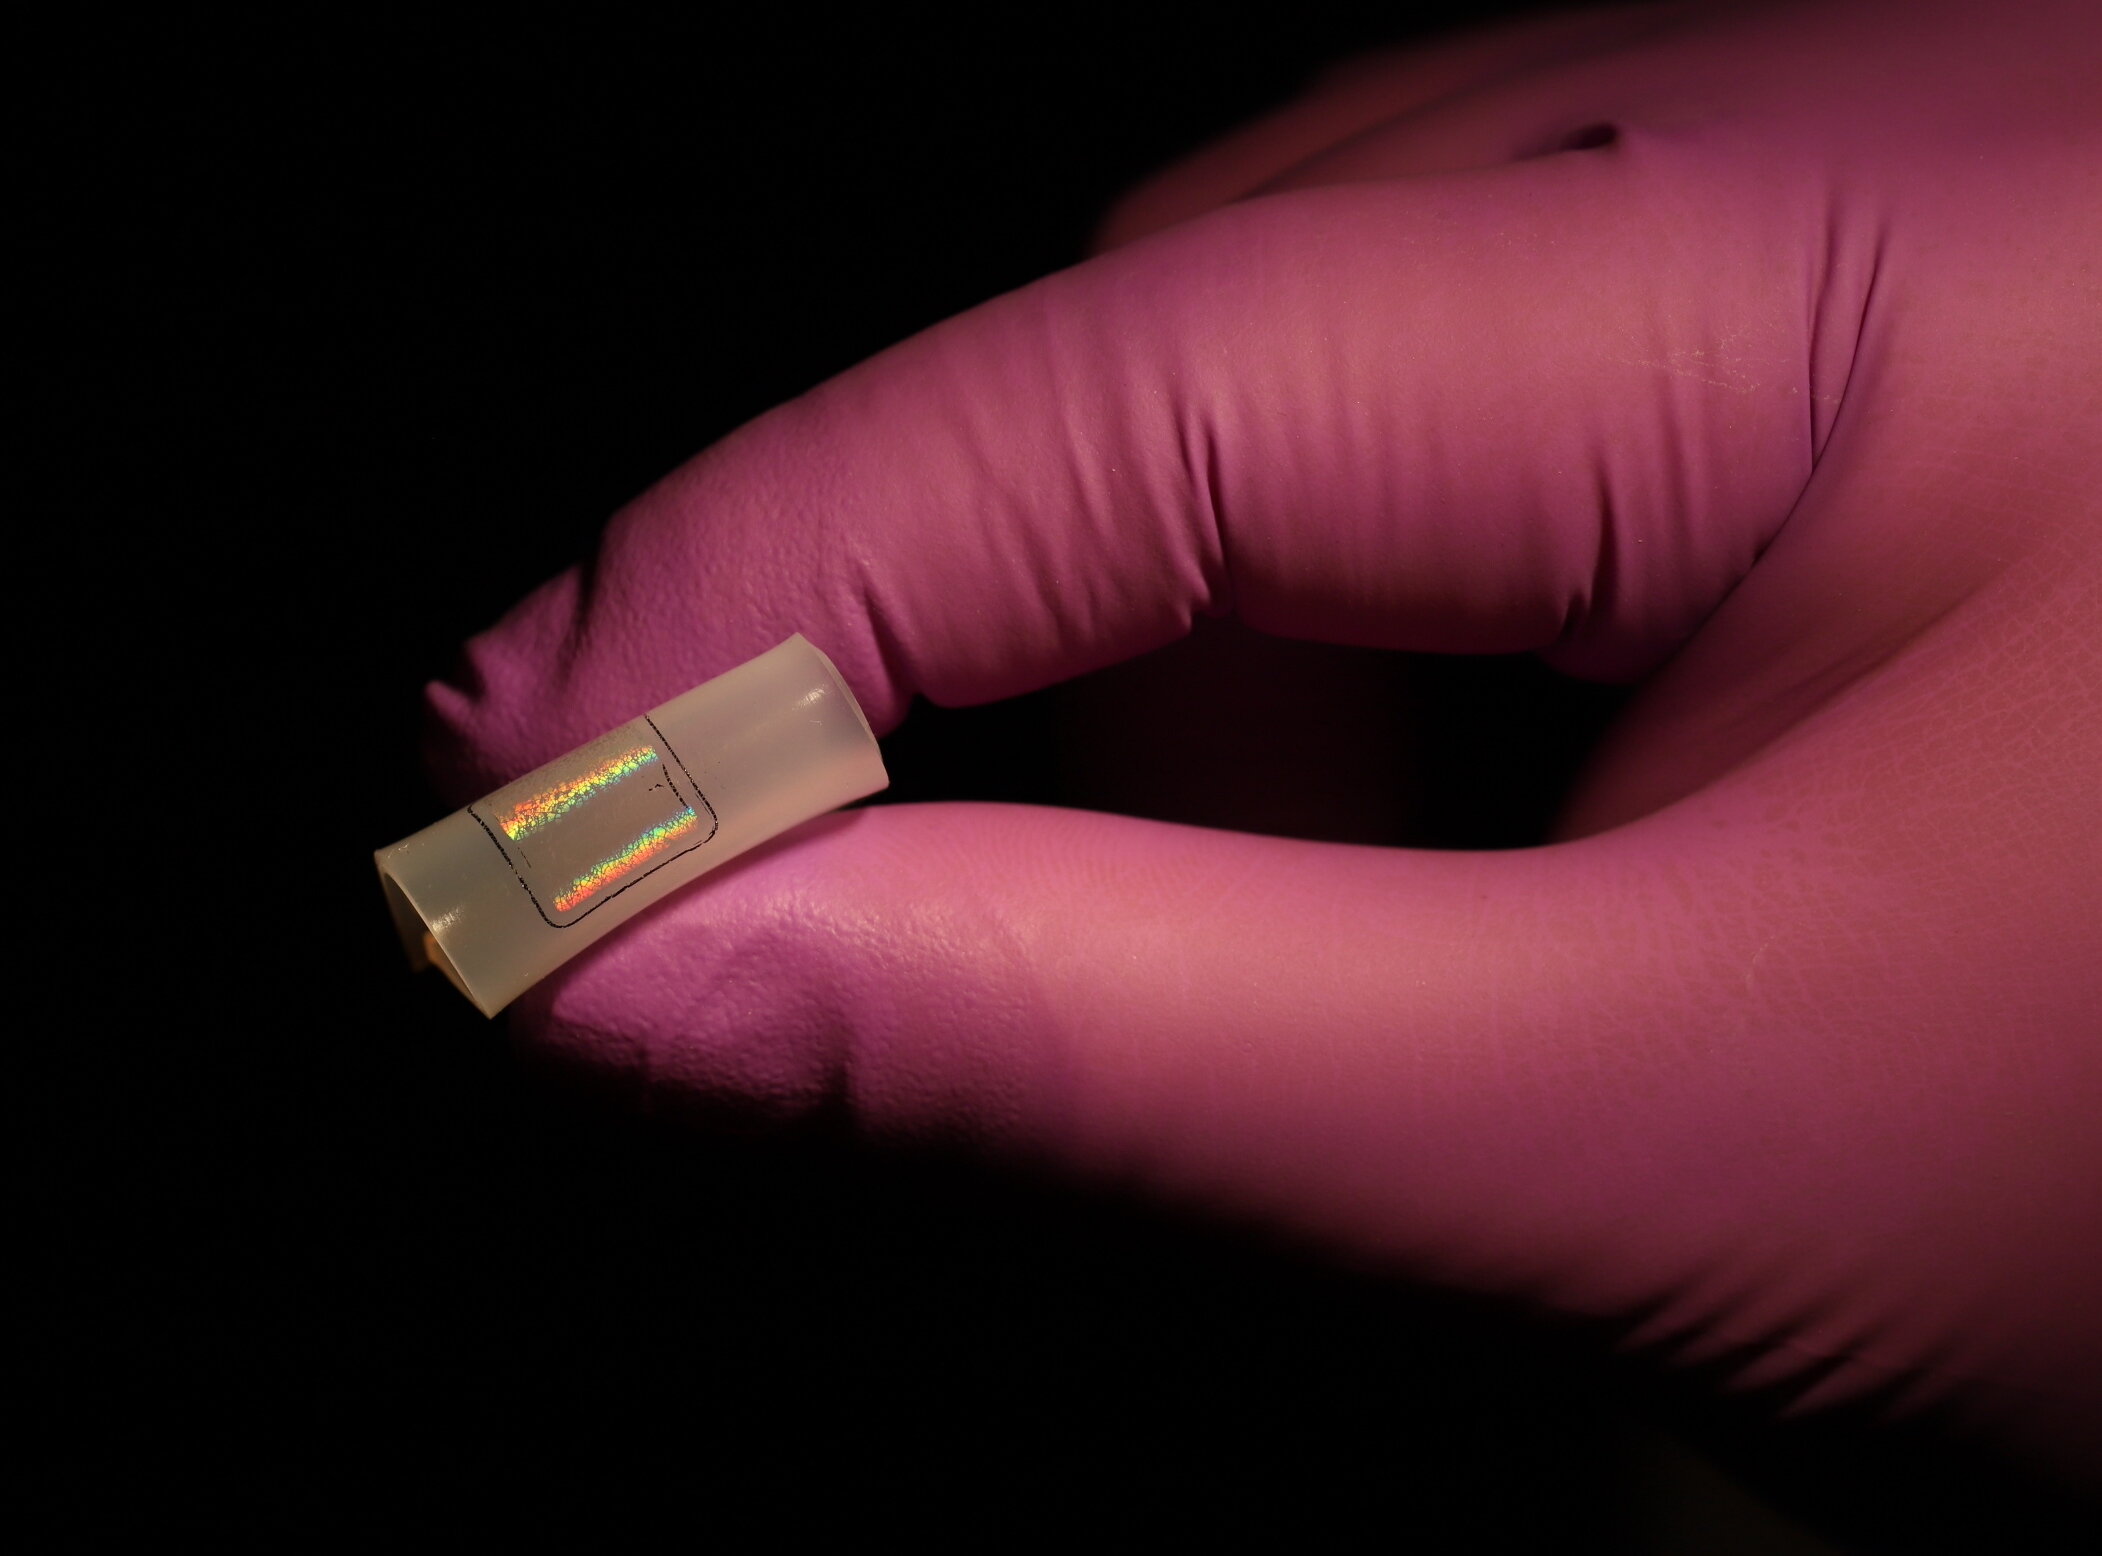 Researchers develop sensor for faster, more accurate COVID-19 tests